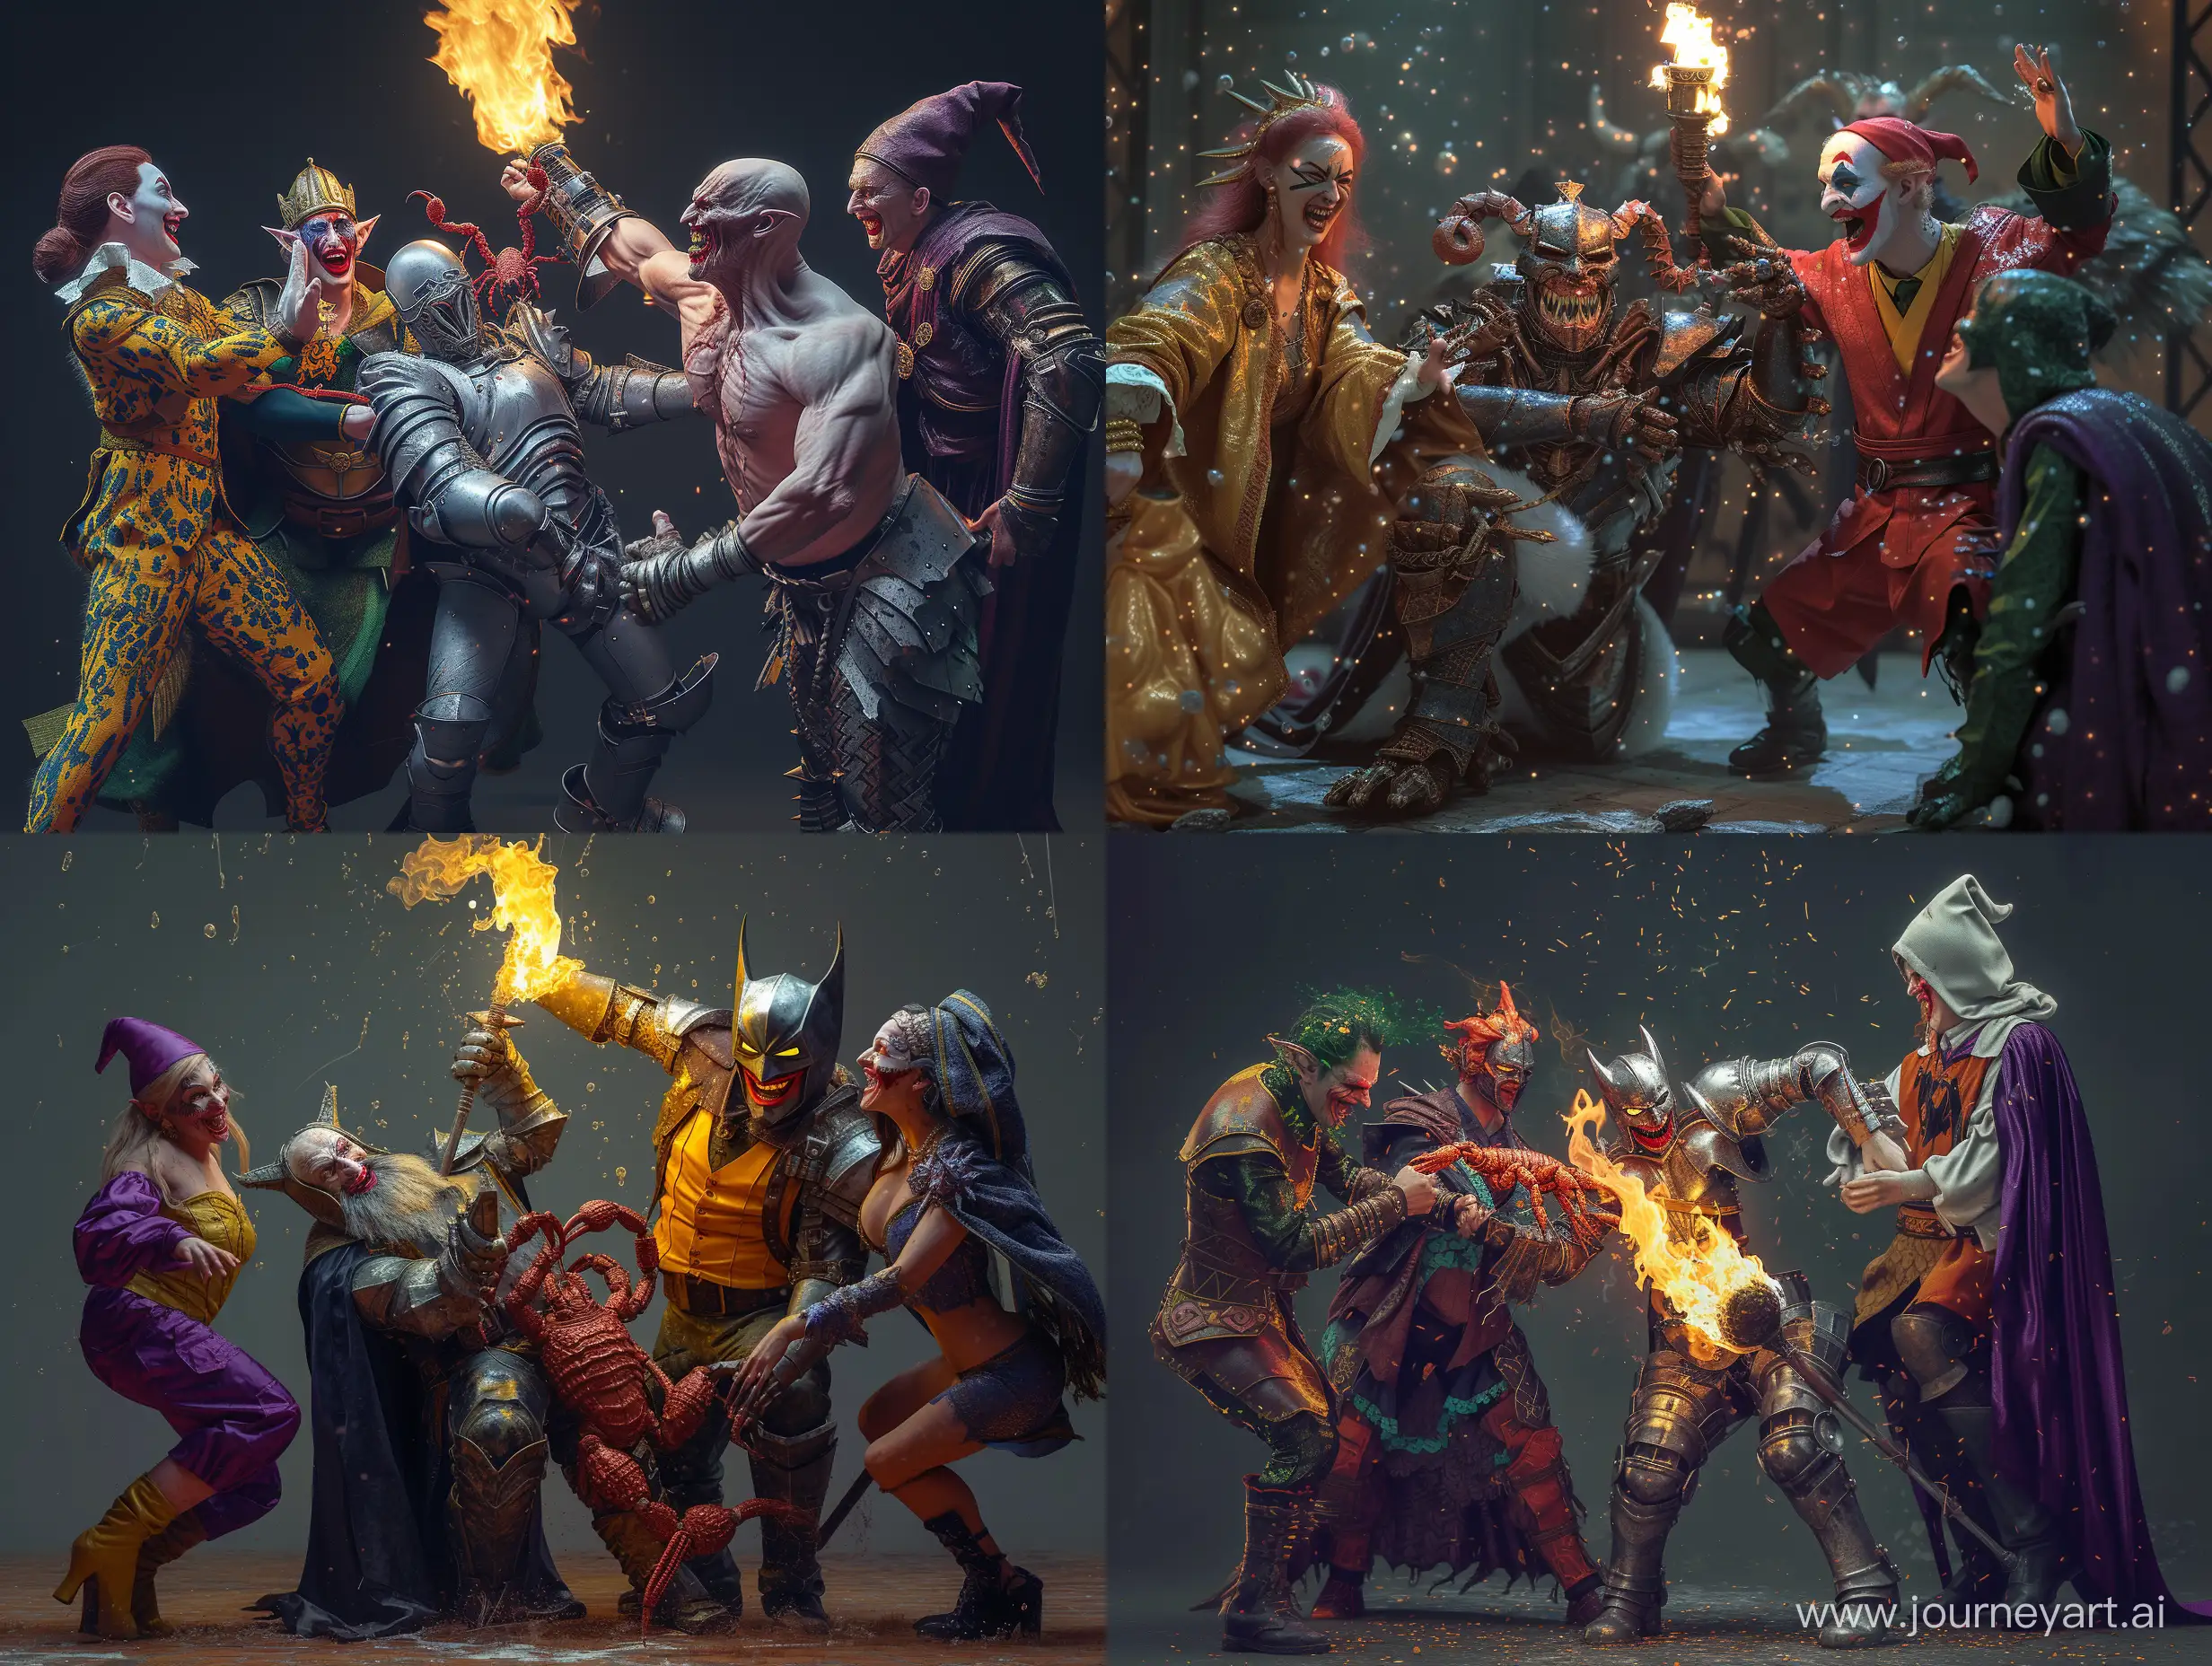 A group consisting of a scorpion king, a wizard, an armored man with a torch, a judge and a joker.
 The Armored Man with the Torch fights the Scorpion King and the Joker laughs at them while the Enchantress casts a spell on everyone while the judge judges. Cinematic, Photoshoot, Shot on 25mm lens, Depth of Field, Tilt Blur, Shutter Speed 1/1000, F/22, White Balance, 32k, Super-Resolution, Pro Photo RGB, Half rear Lighting, Backlight, Dramatic Lighting, Incandescent, Soft Lighting, Volumetric, Conte-Jour, Global Illumination, Screen Space Global Illumination, Scattering, Shadows, Rough, Shimmering, Lumen Reflections, Screen Space Reflections, Diffraction Grading, Chromatic Aberration, GB Displacement, Scan Lines, Ambient Occlusion, Anti-Aliasing, FKAA, TXAA, RTX, SSAO, OpenGL-Shader’s, Post Processing, Post-Production, Cell Shading, Tone Mapping, CGI, VFX, SFX, insanely detailed and intricate, hyper maximalist, elegant, dynamic pose, photography, volumetric, ultra-detailed, intricate details, super detailed